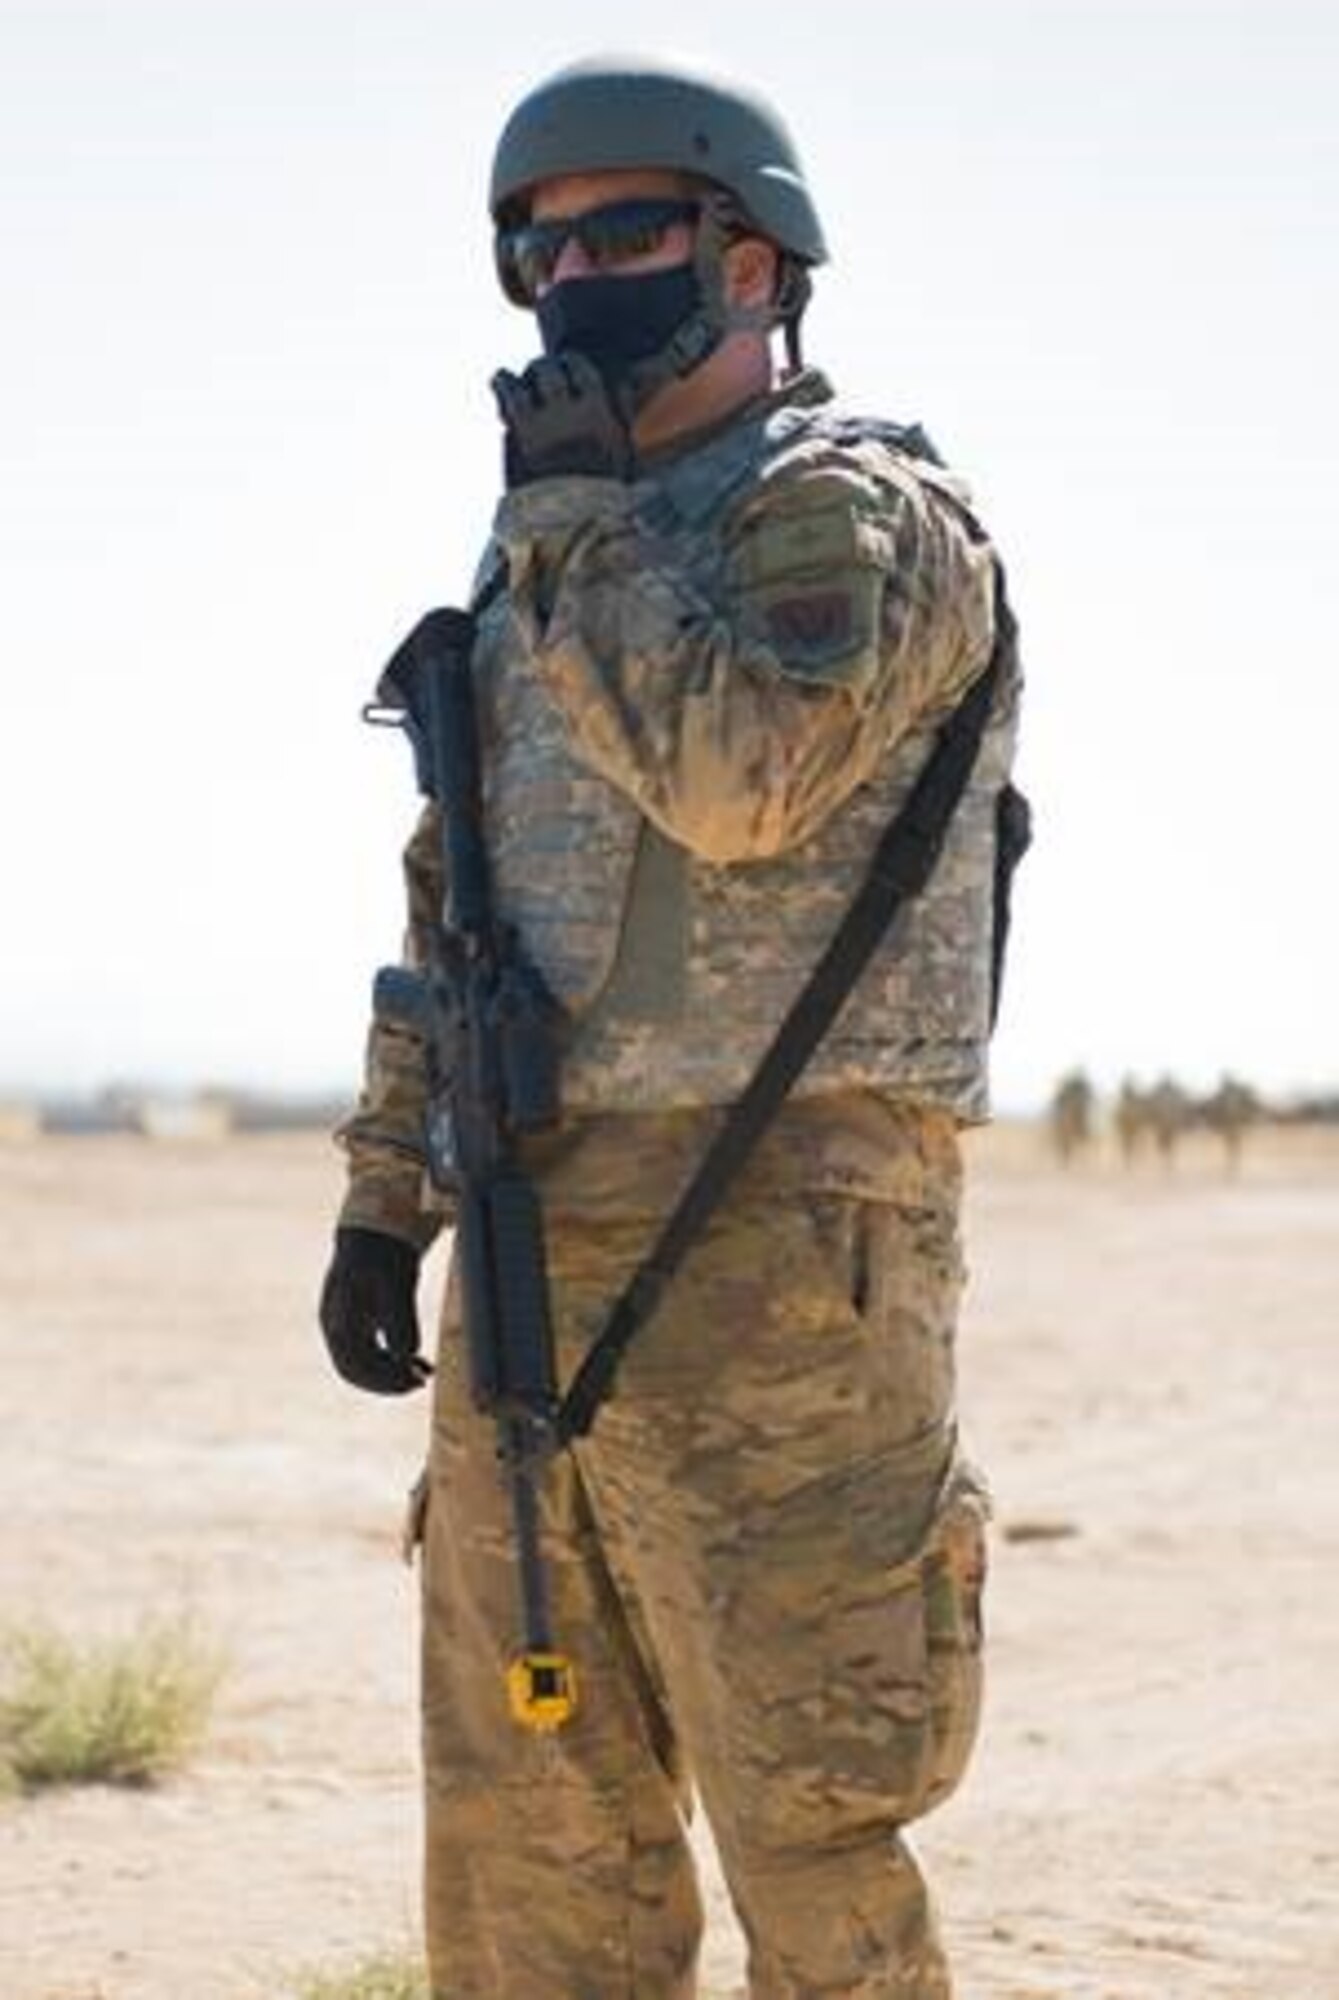 Master Sgt. Jason Proctor is known for stepping up to make sure the mission gets accomplished. Courtesy photo